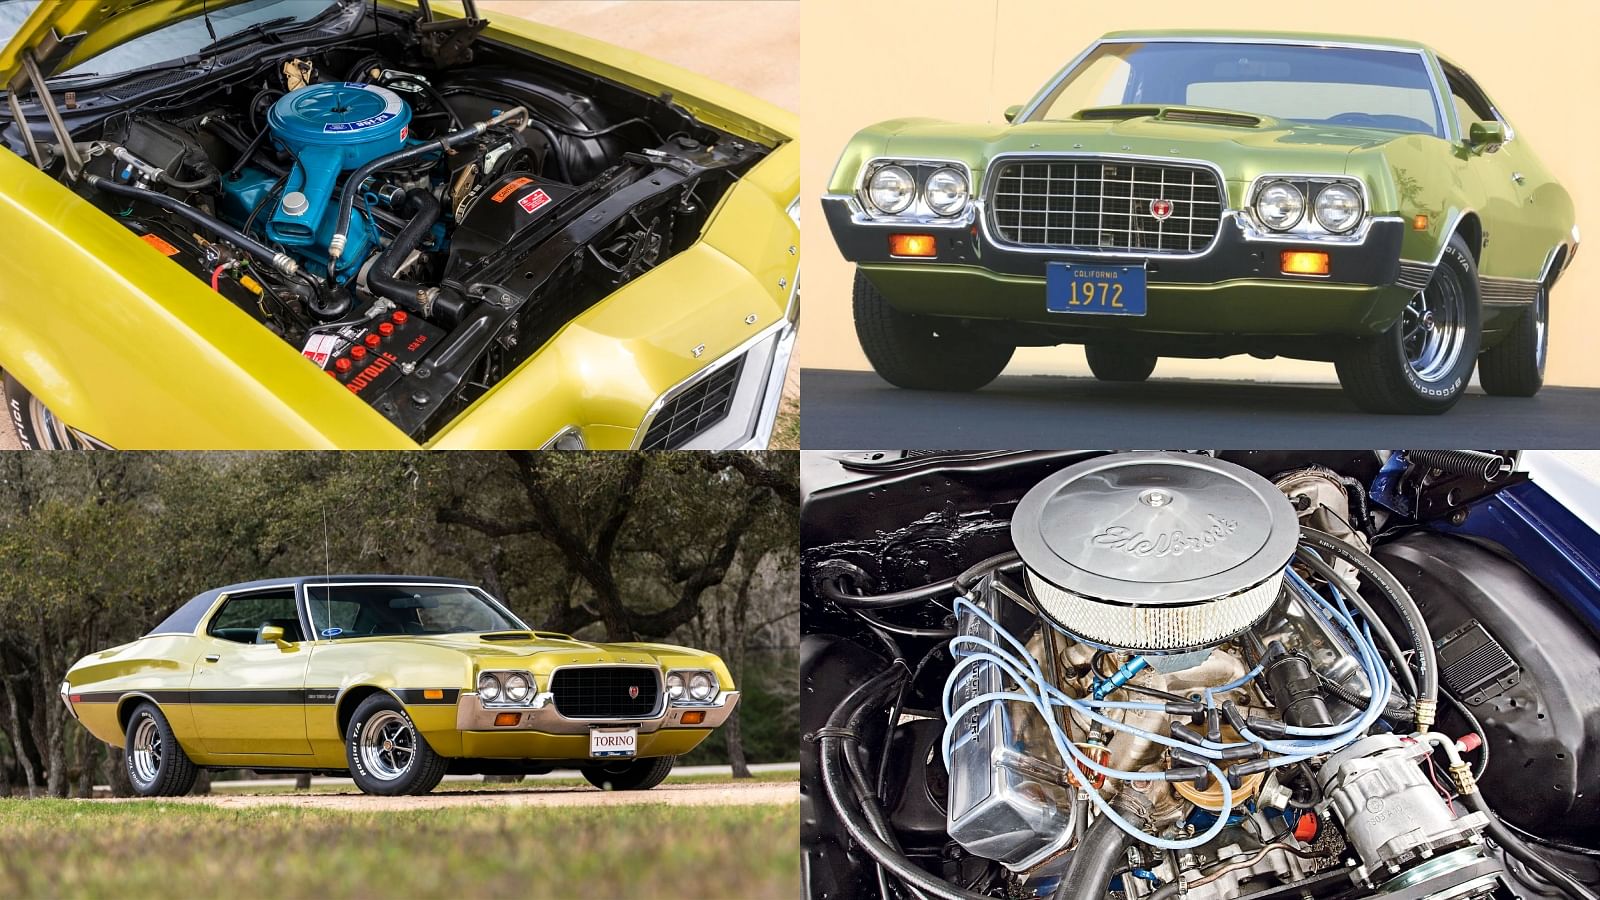 1972 Ford Gran Torino Sport and its engine